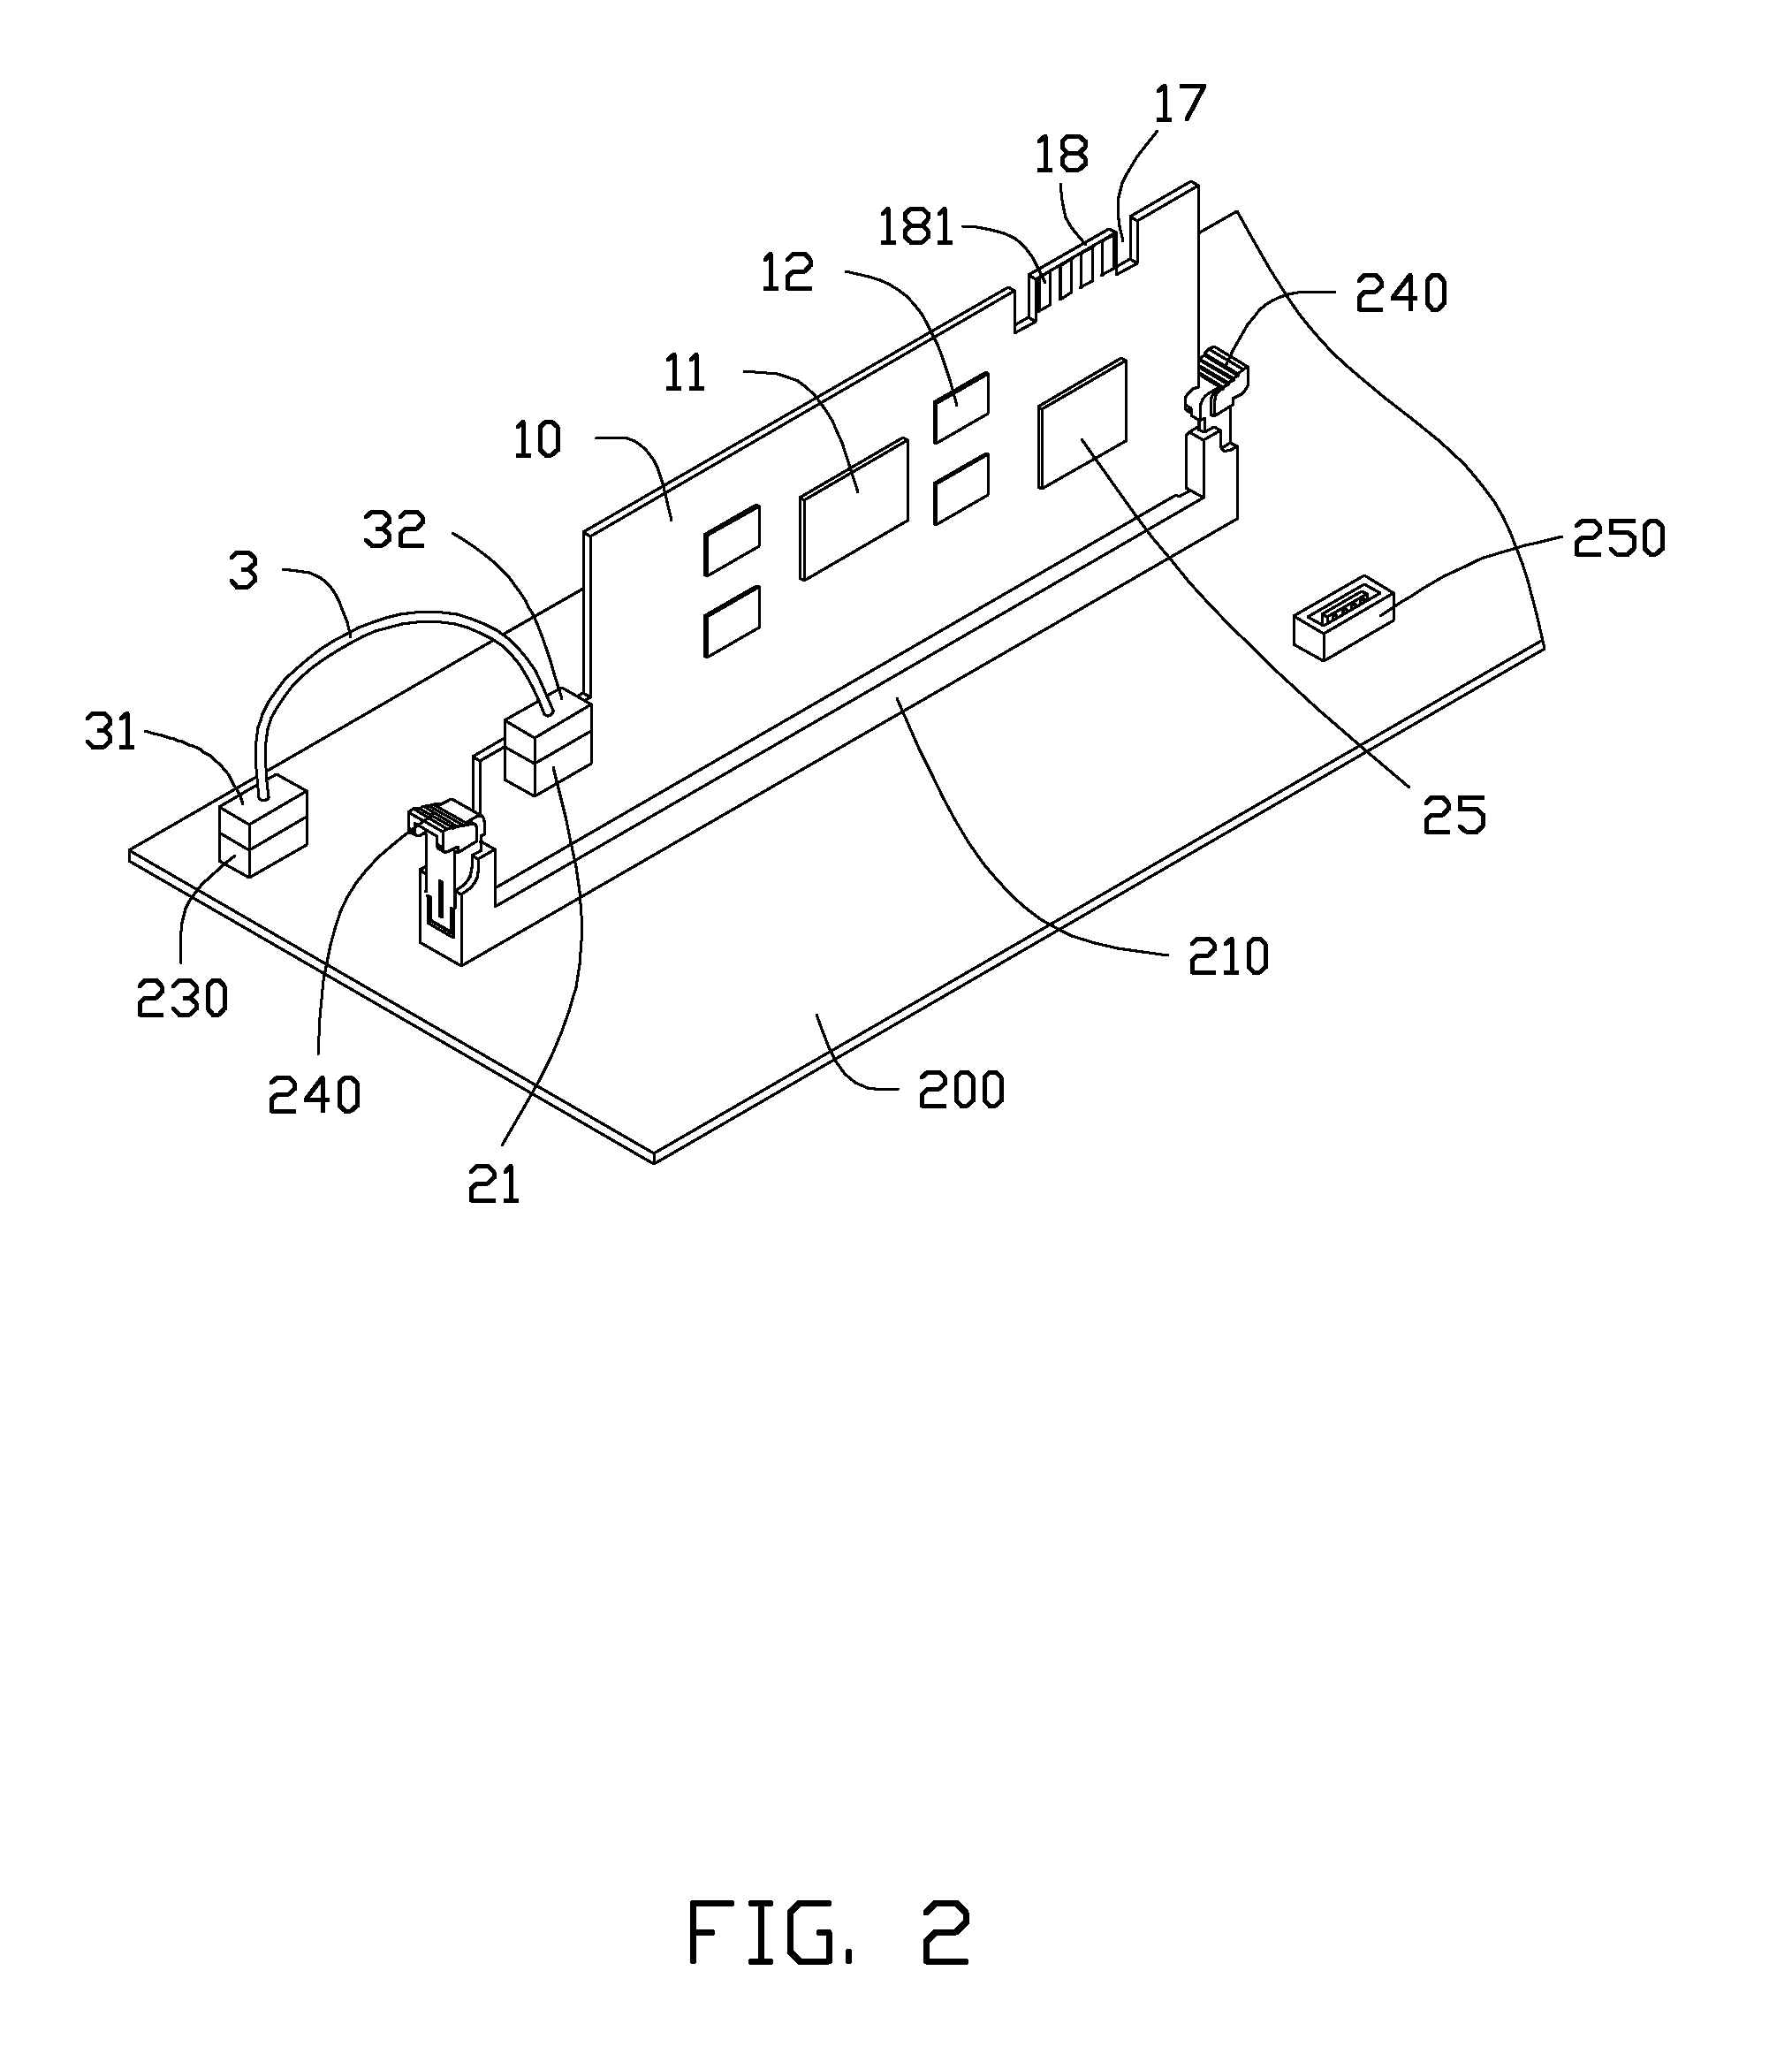 Motherboard assembly having serial advanced technology attachment dual in-line memory module